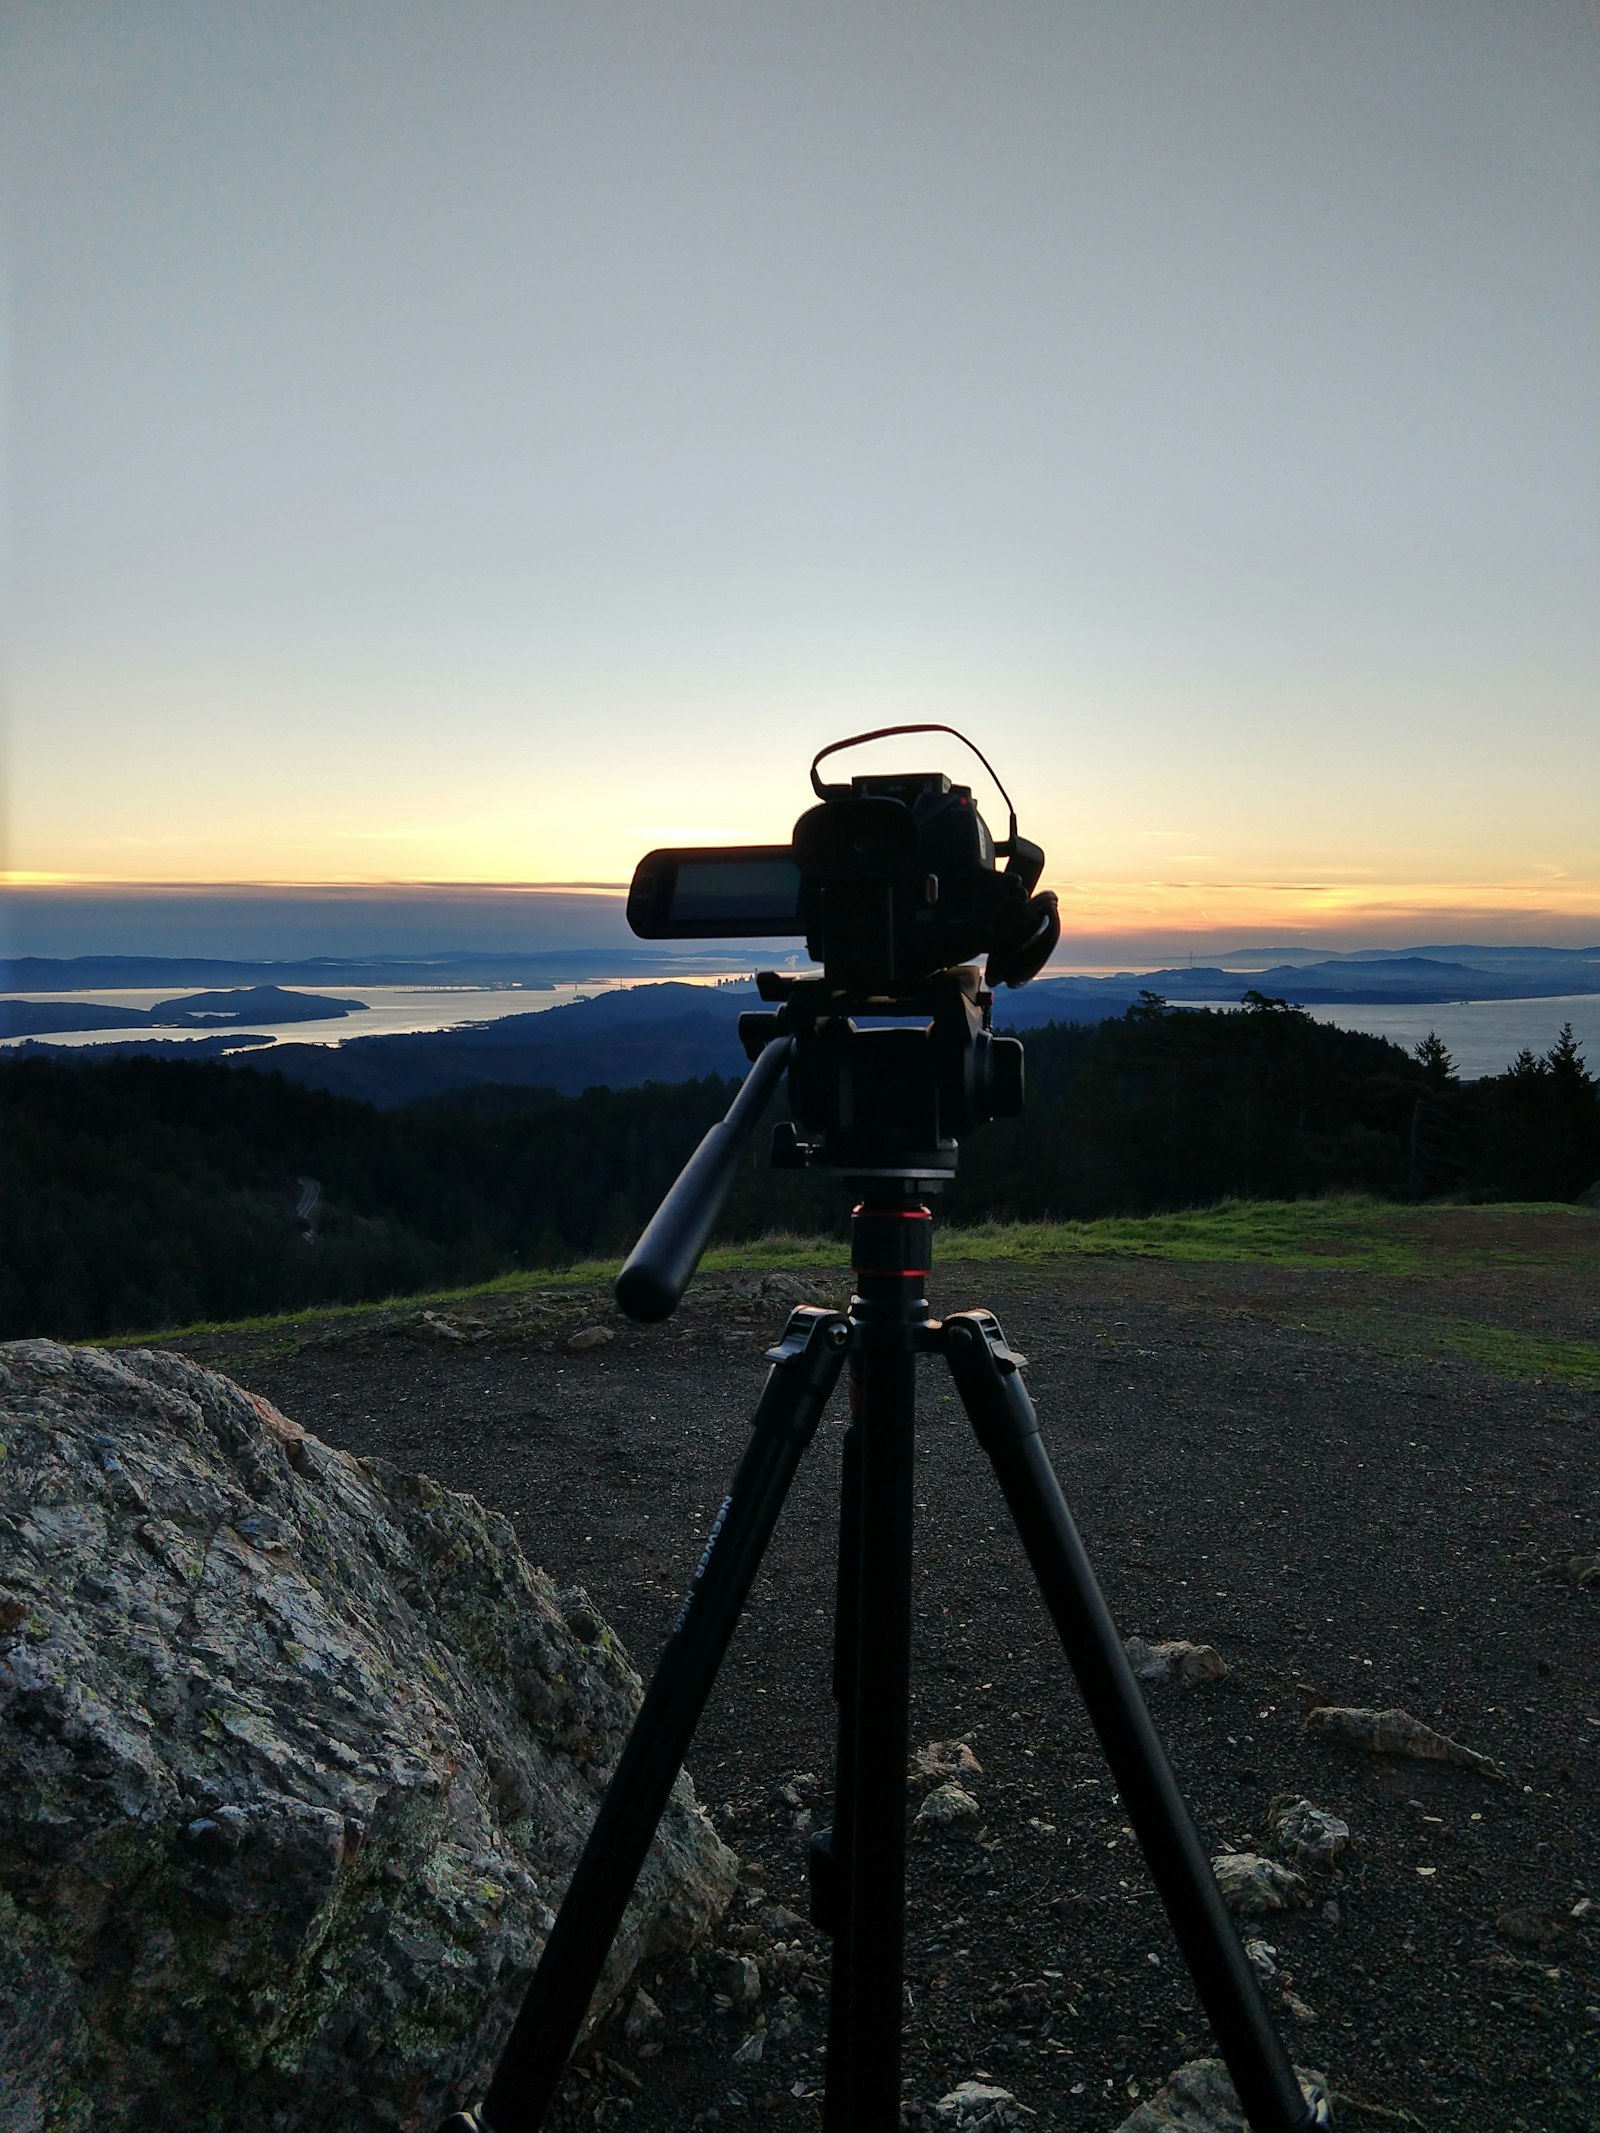 A video camera on a tripod filming the evening sky